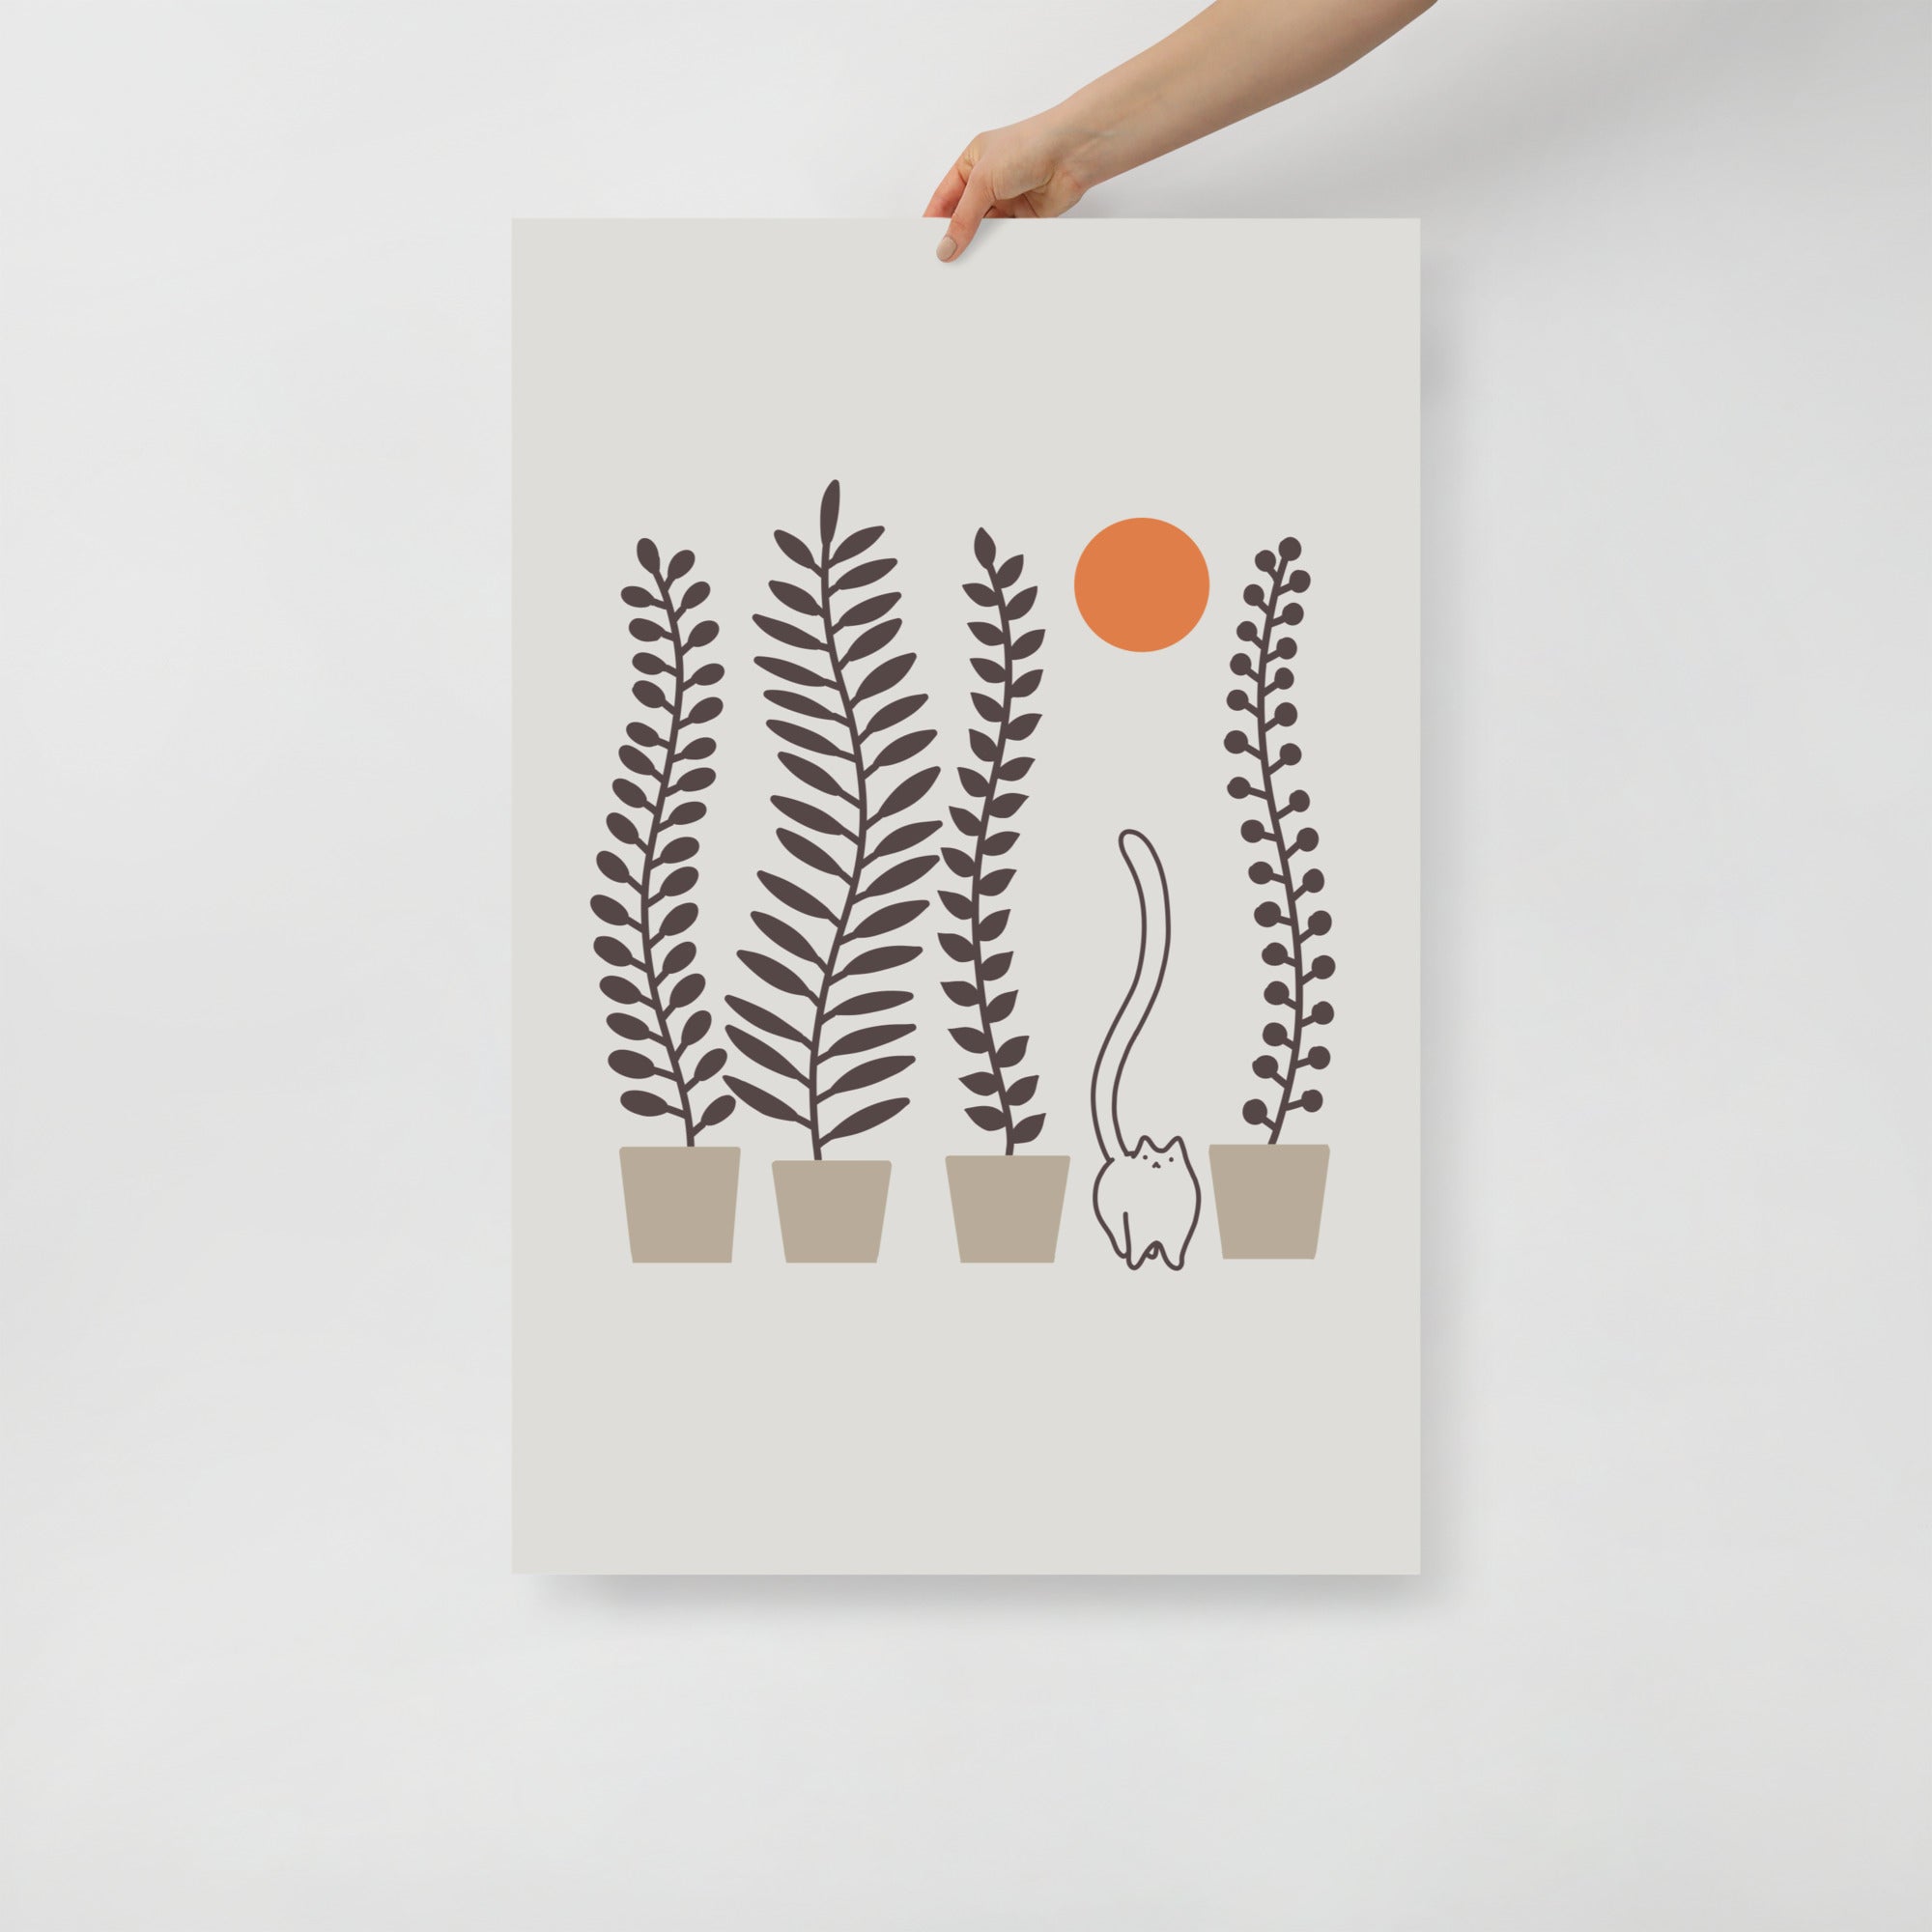 Cat and Plant 64: Dancing Tail - Art print